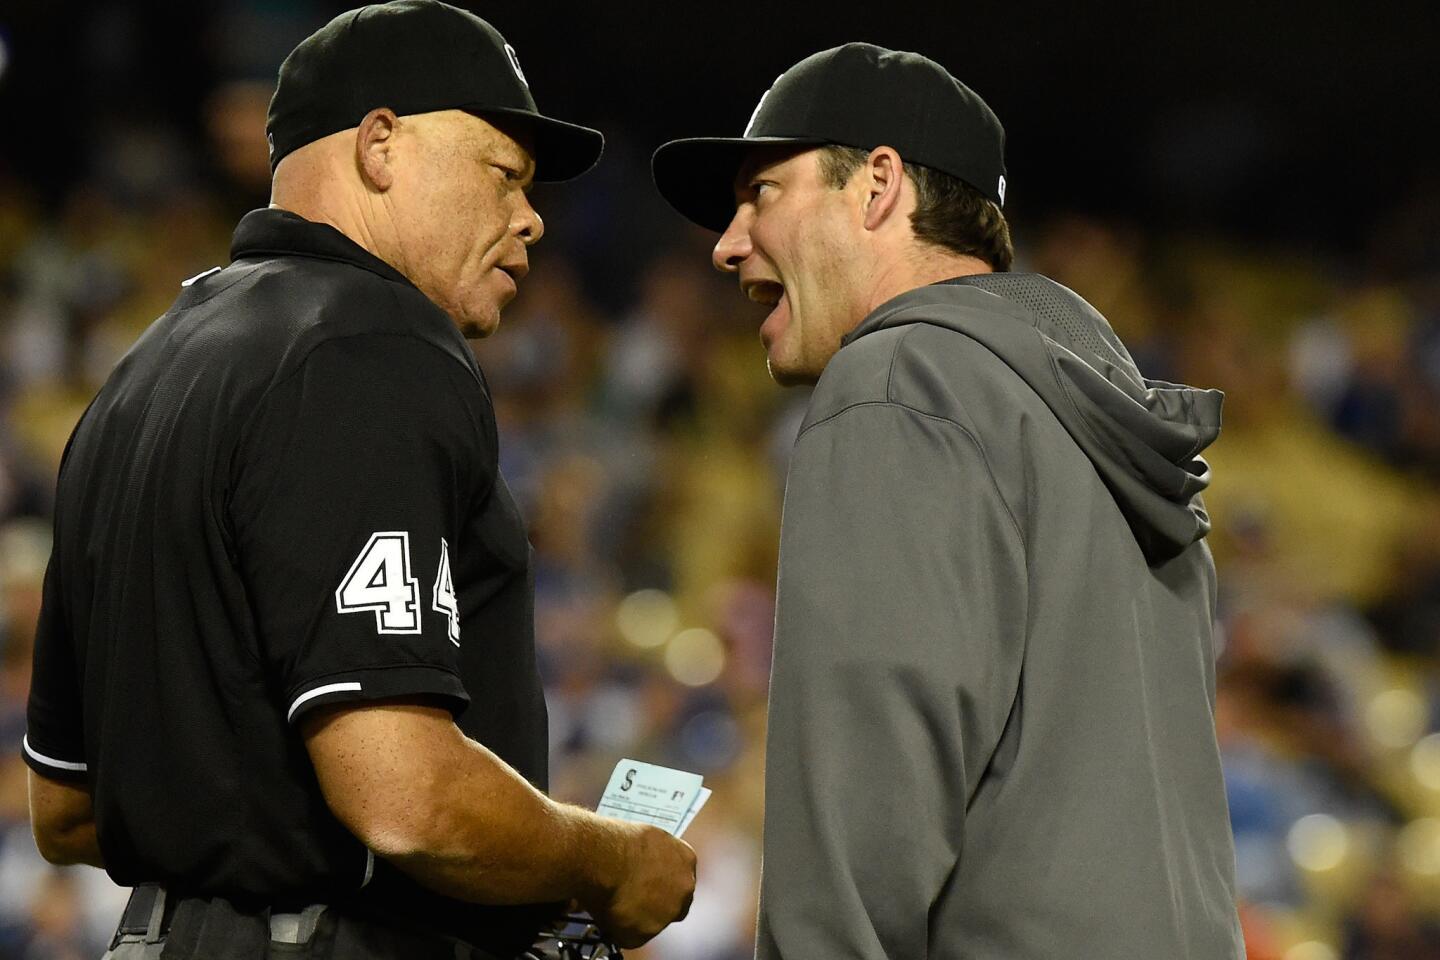 Manager Robin Ventura argues with umpire Kerwin Danley after being ejected in the eighth inning.